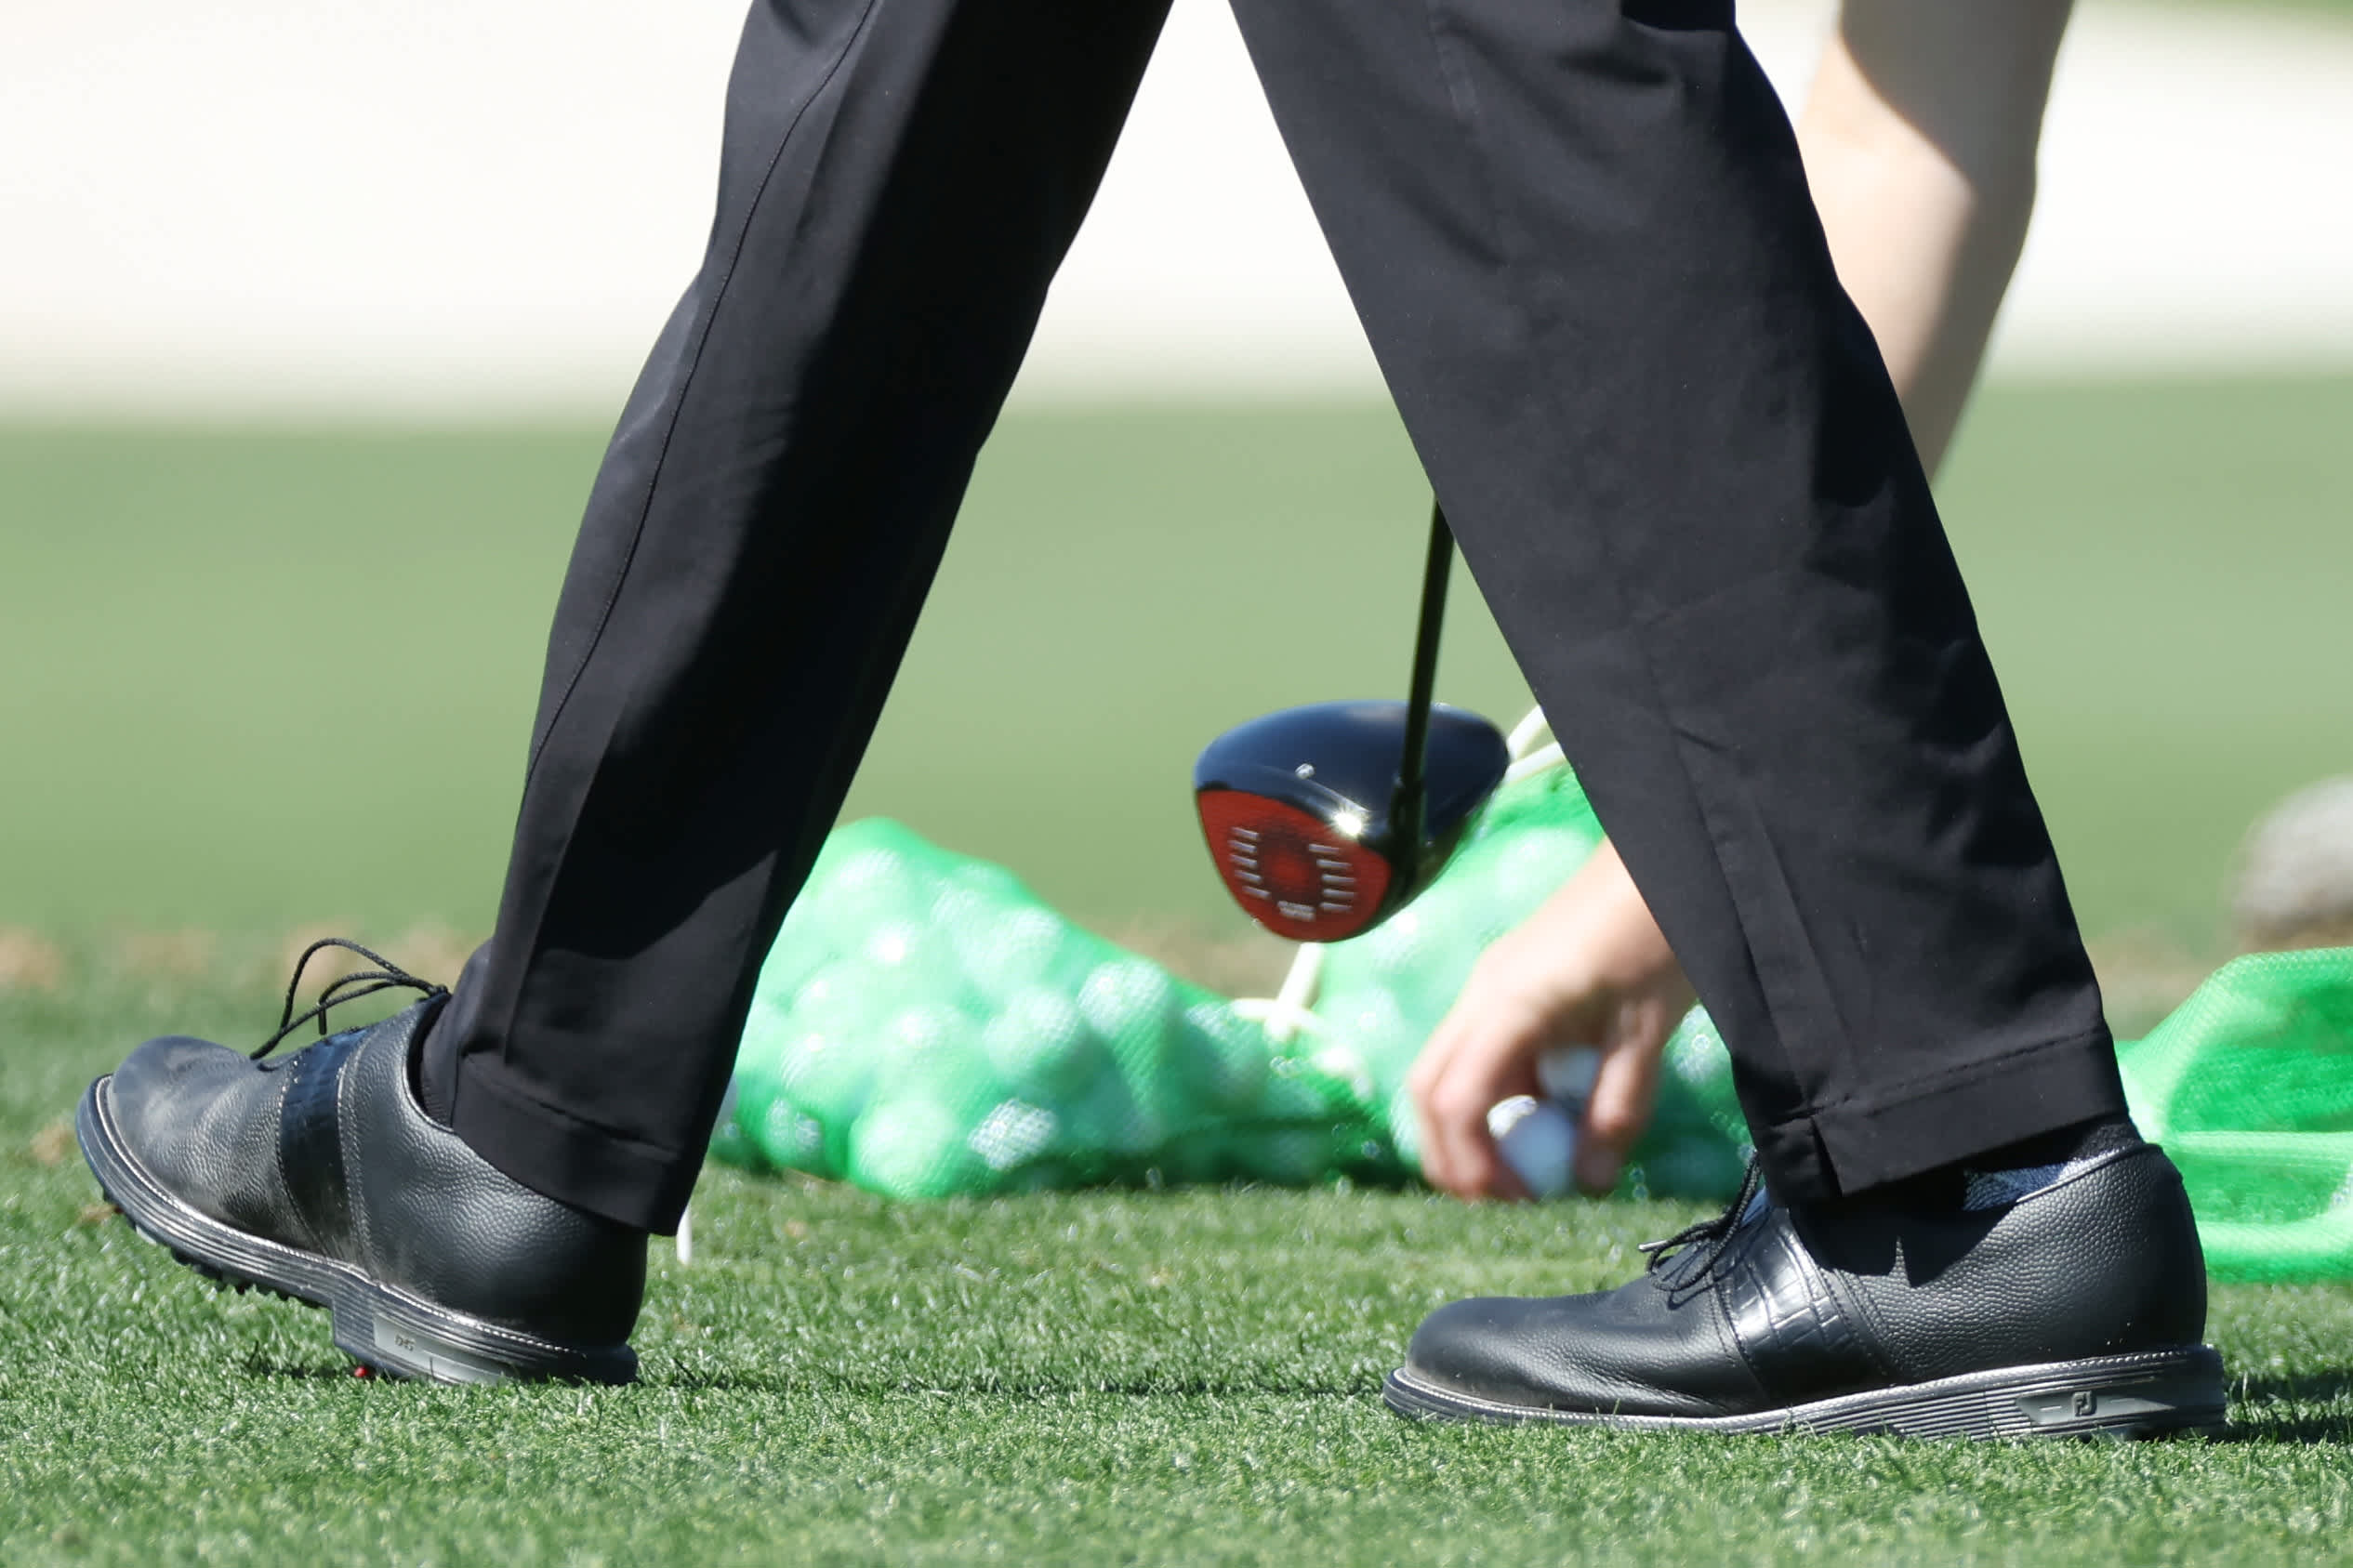 Tiger Woods turns up at Augusta National in FootJoy golf shoes, not Nike